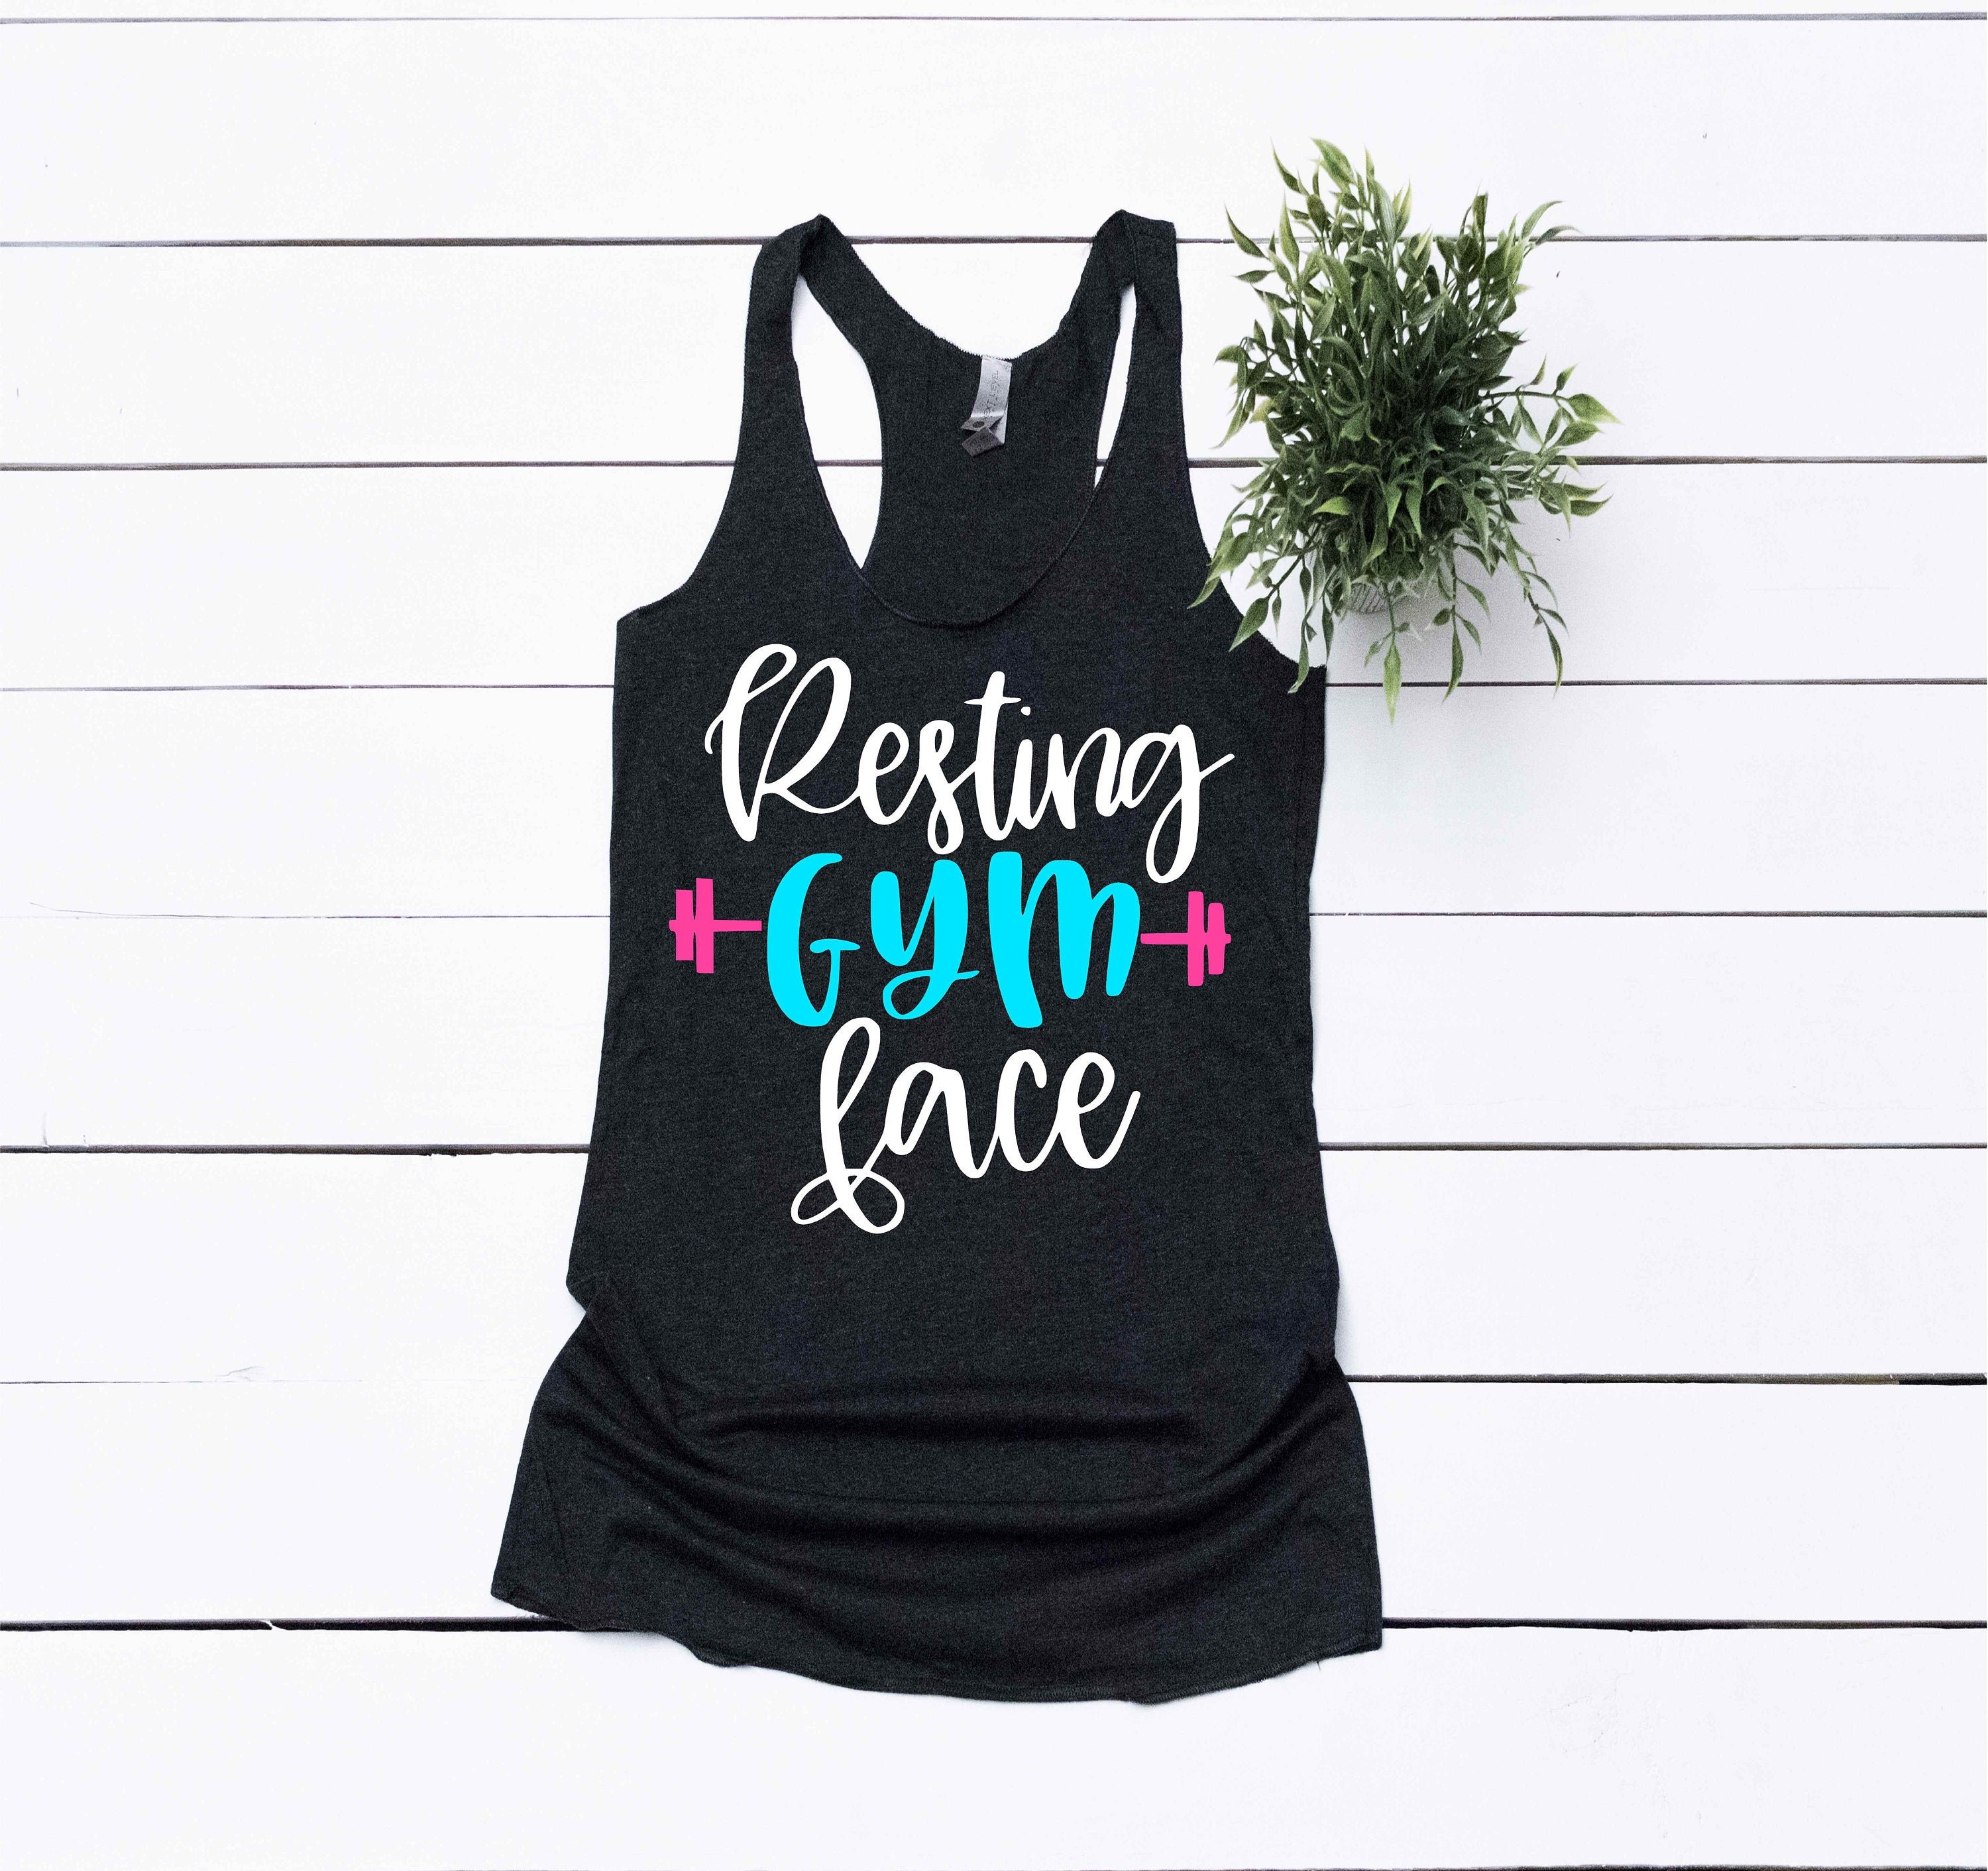 Resting Gym Face Workout Tanks for Women Funny Gym Shirts Next